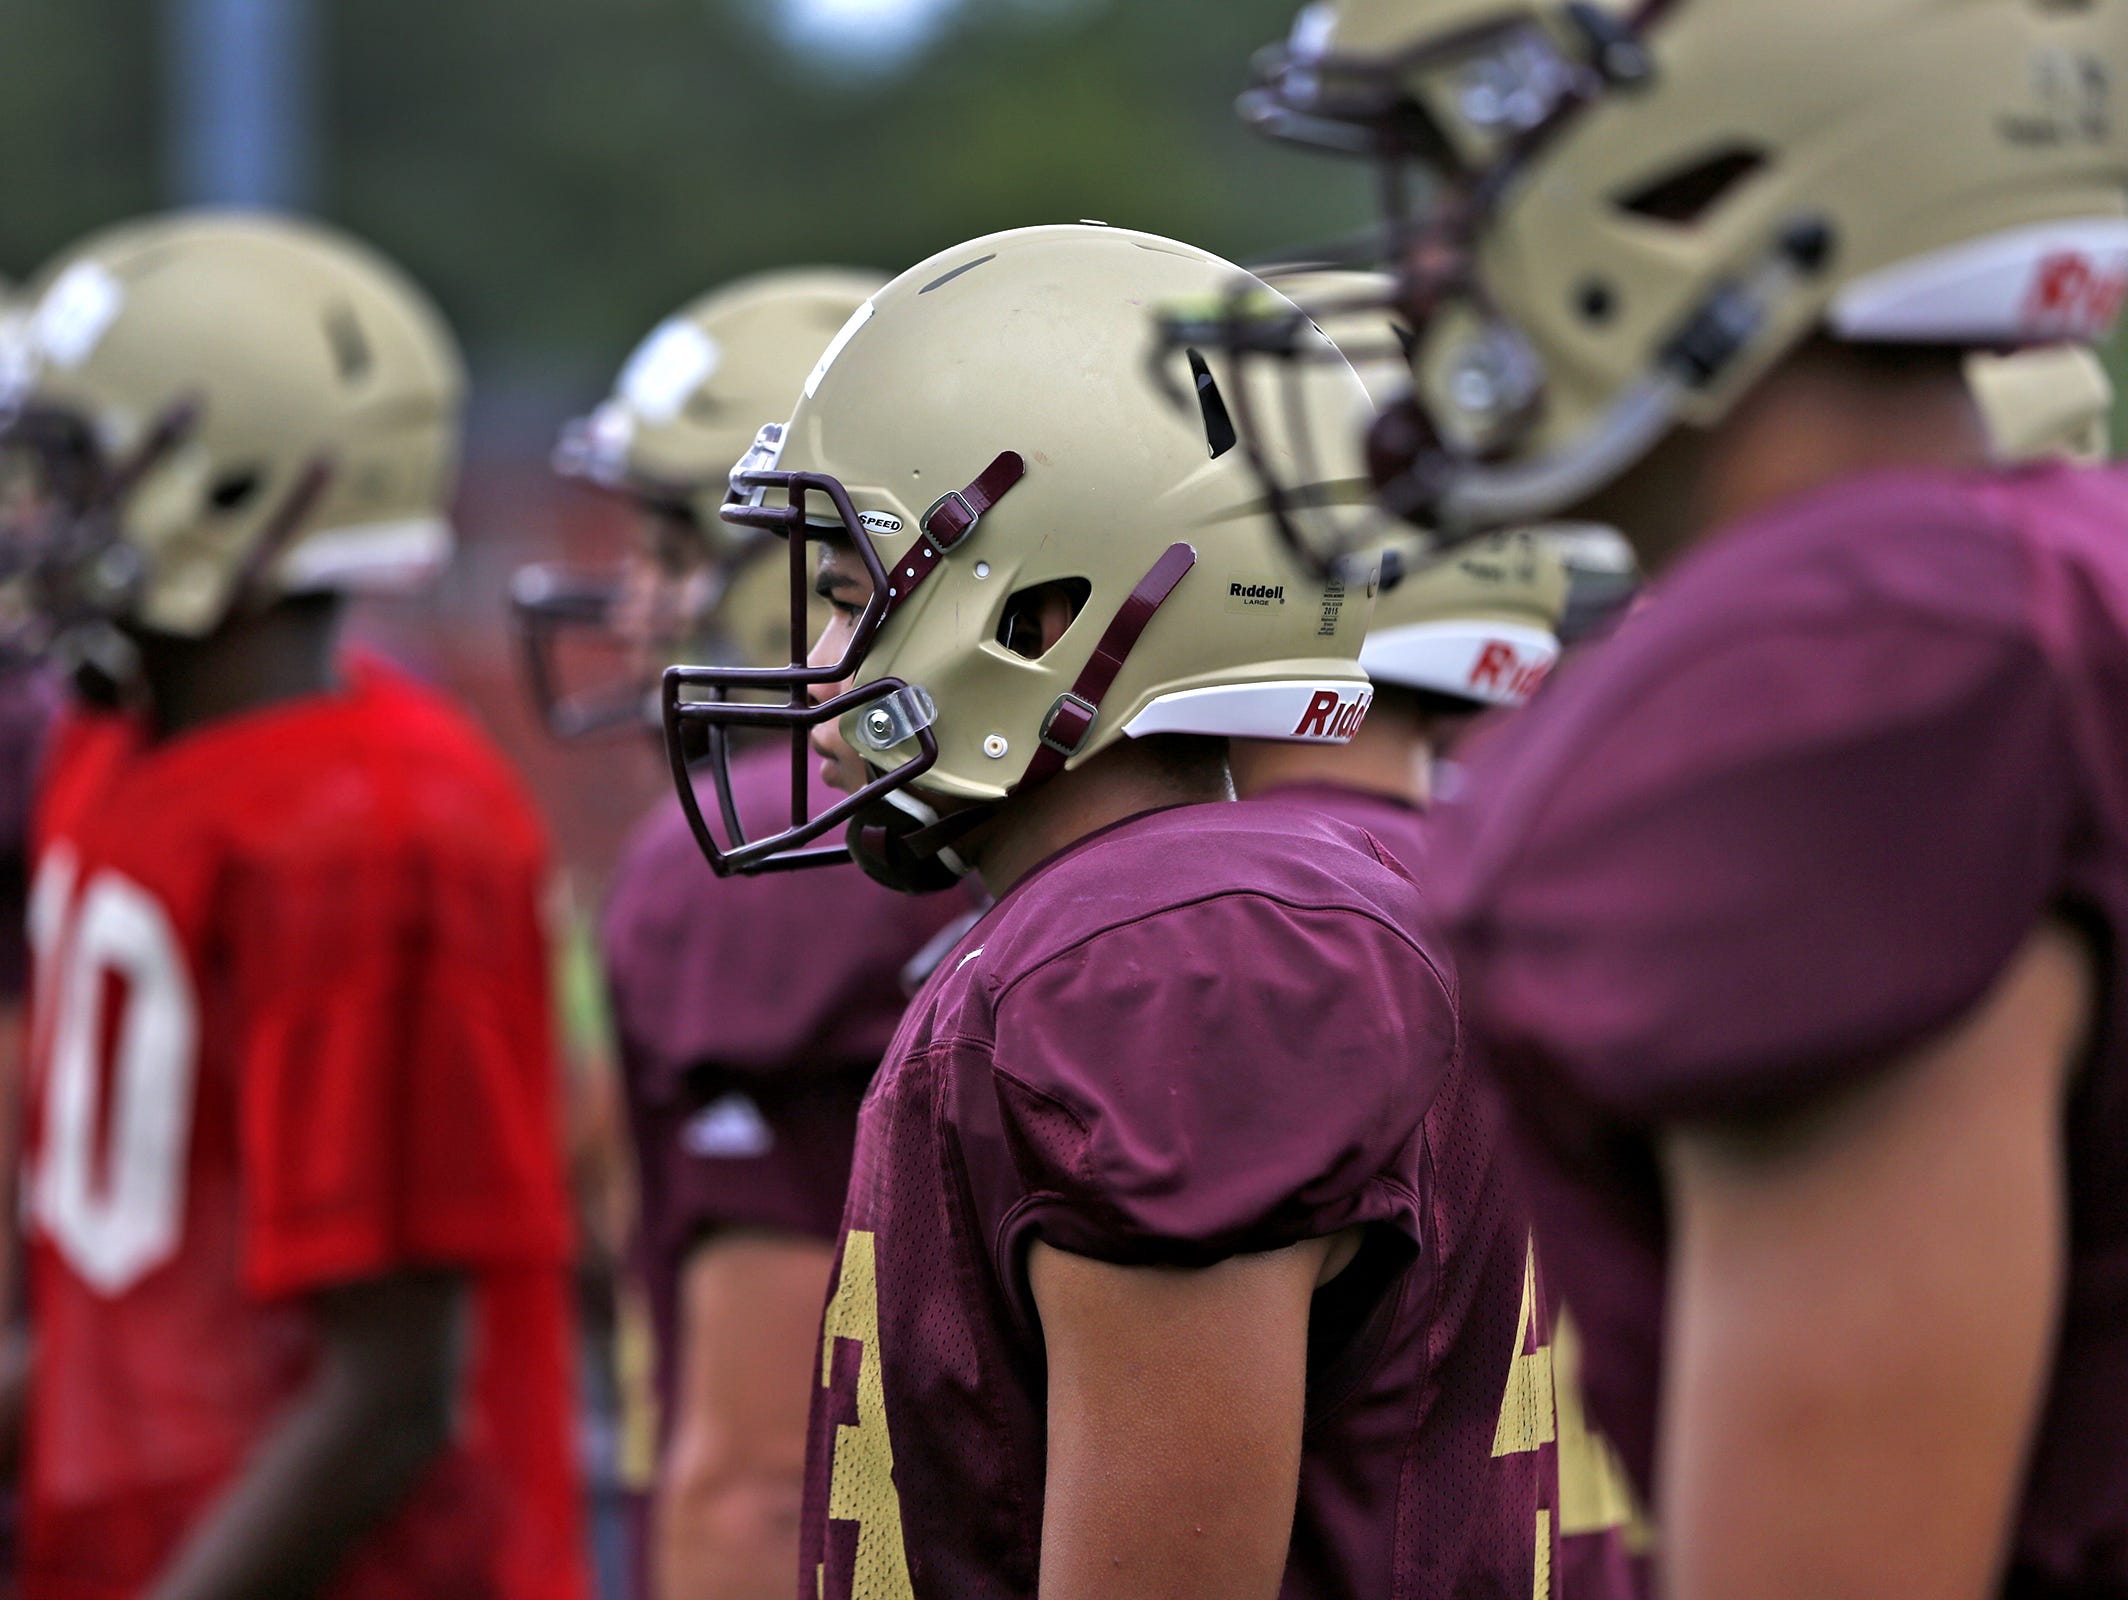 Brebeuf football players wear Riddell helmets with InSite impact monitoring system which monitors impacts as they occur for players.